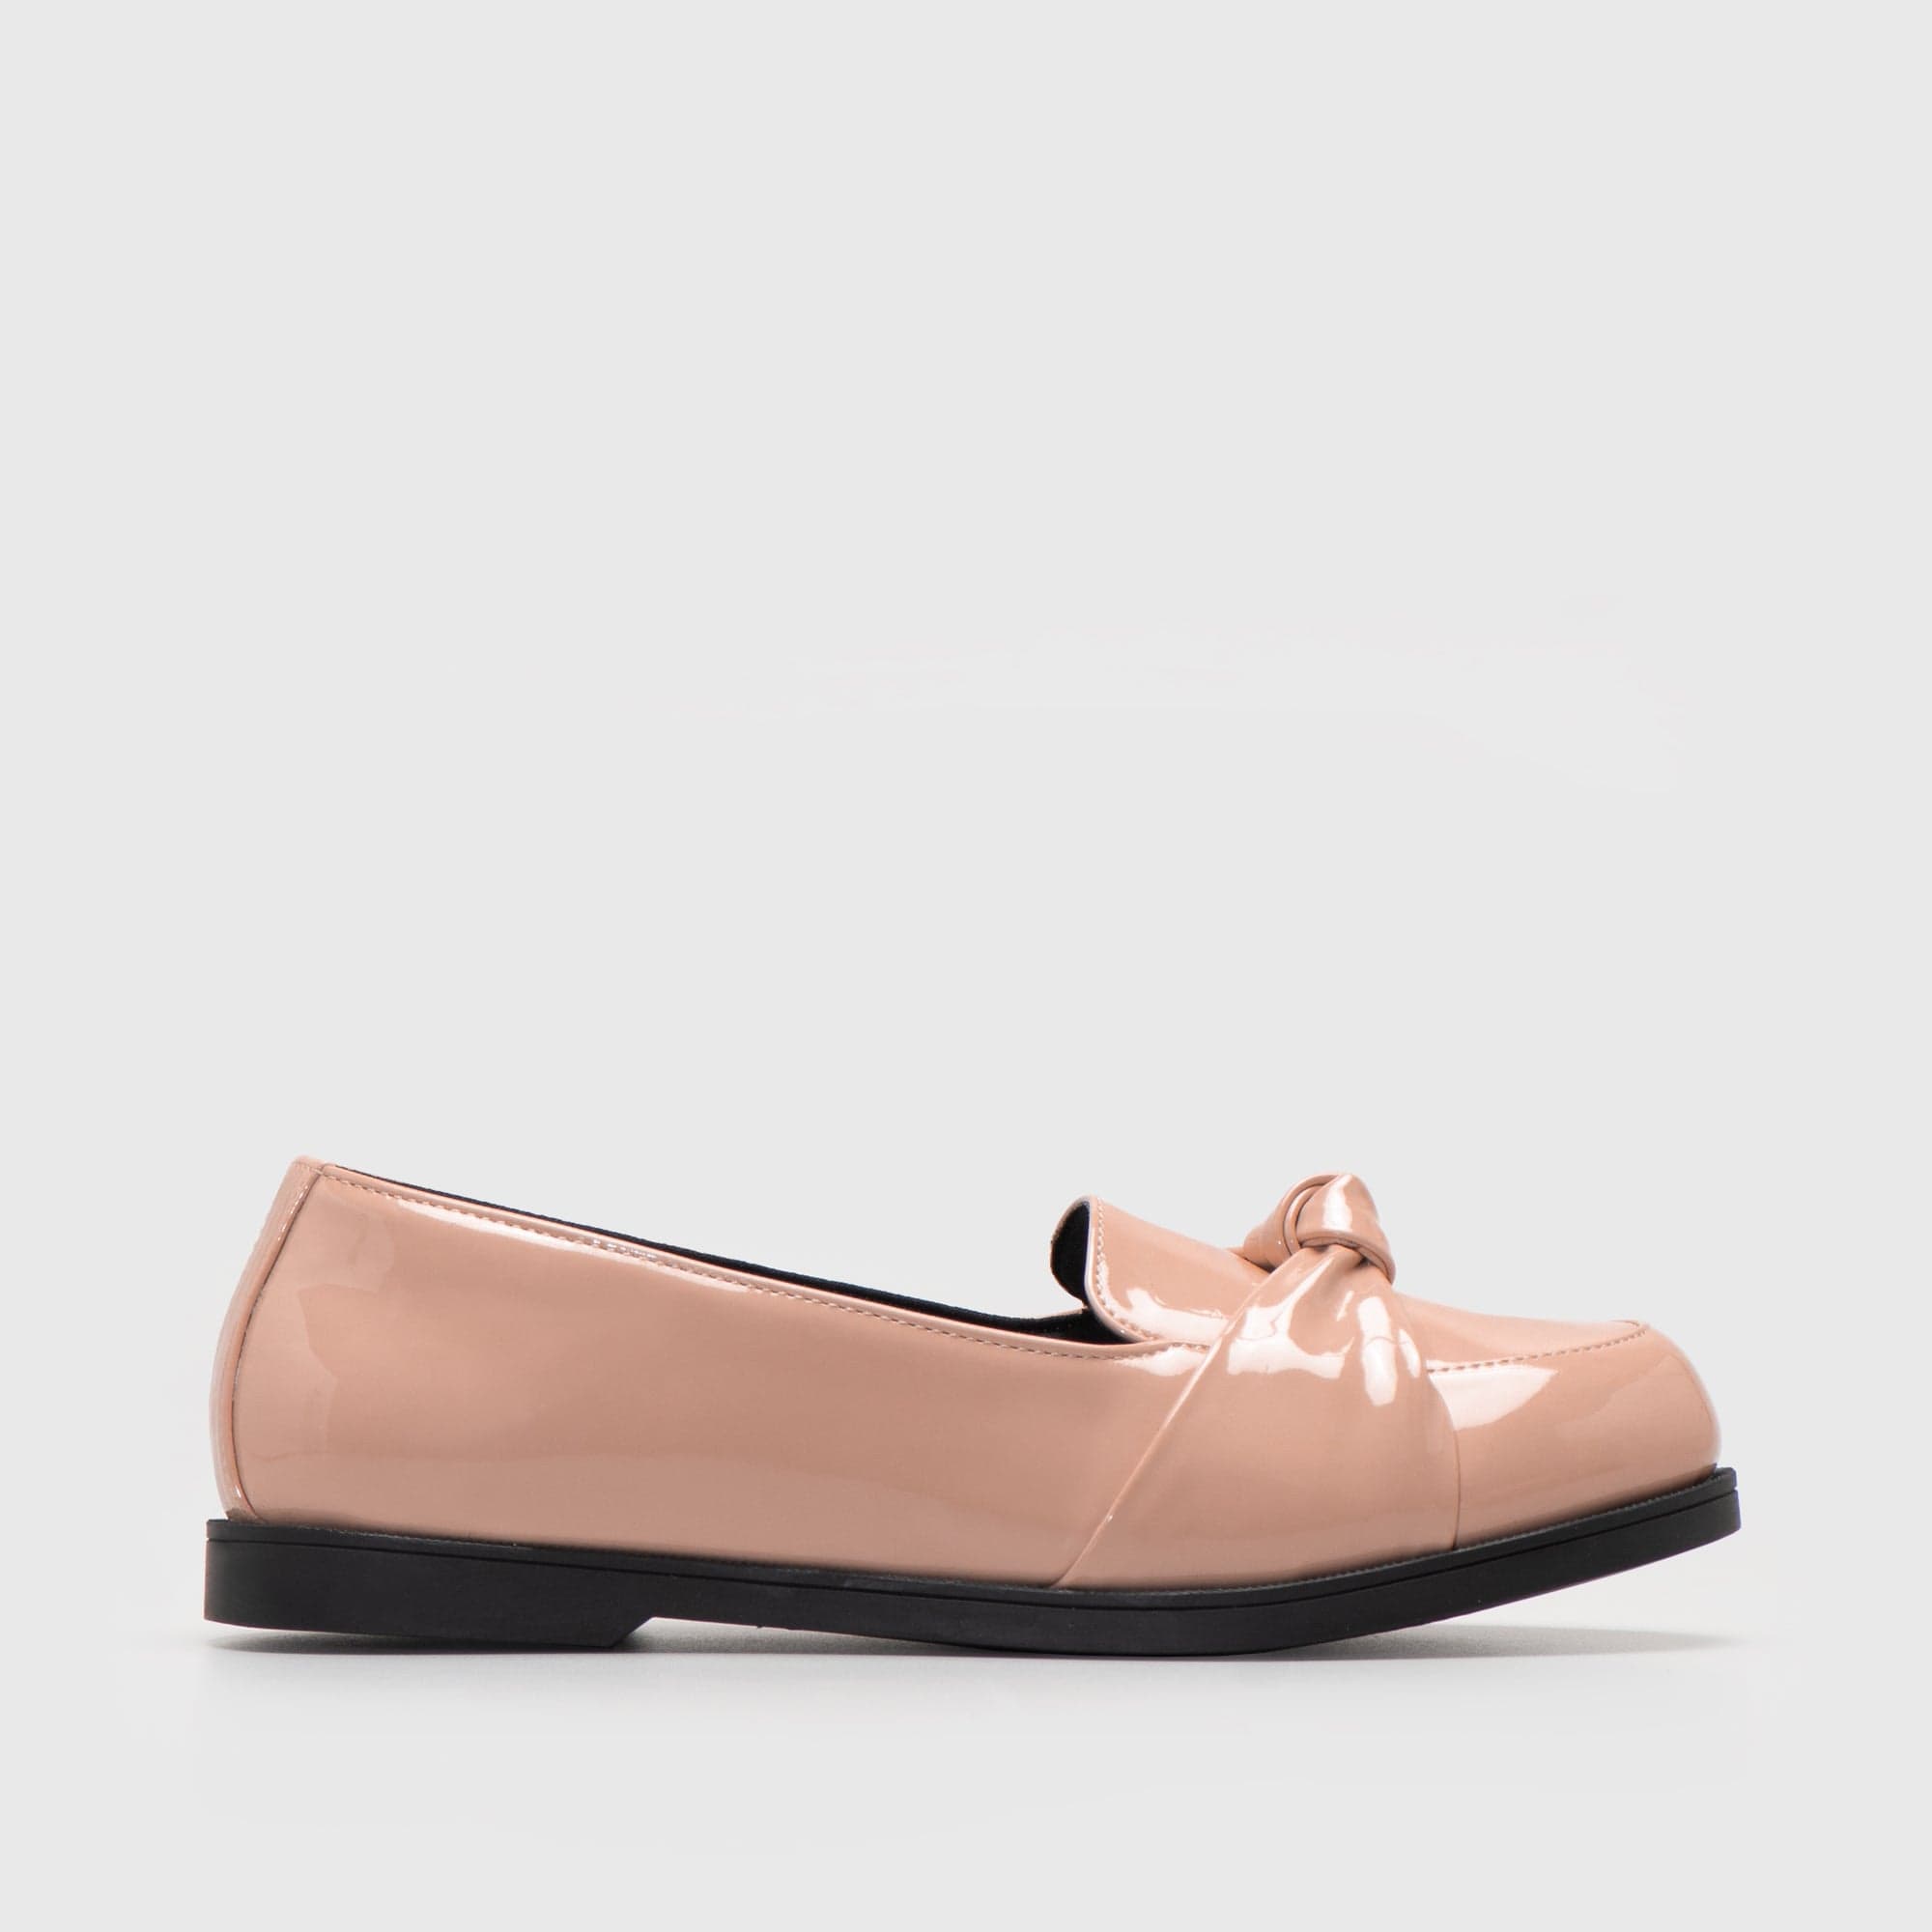 Adorable Projects Official Oxford Tara Oxford Nude